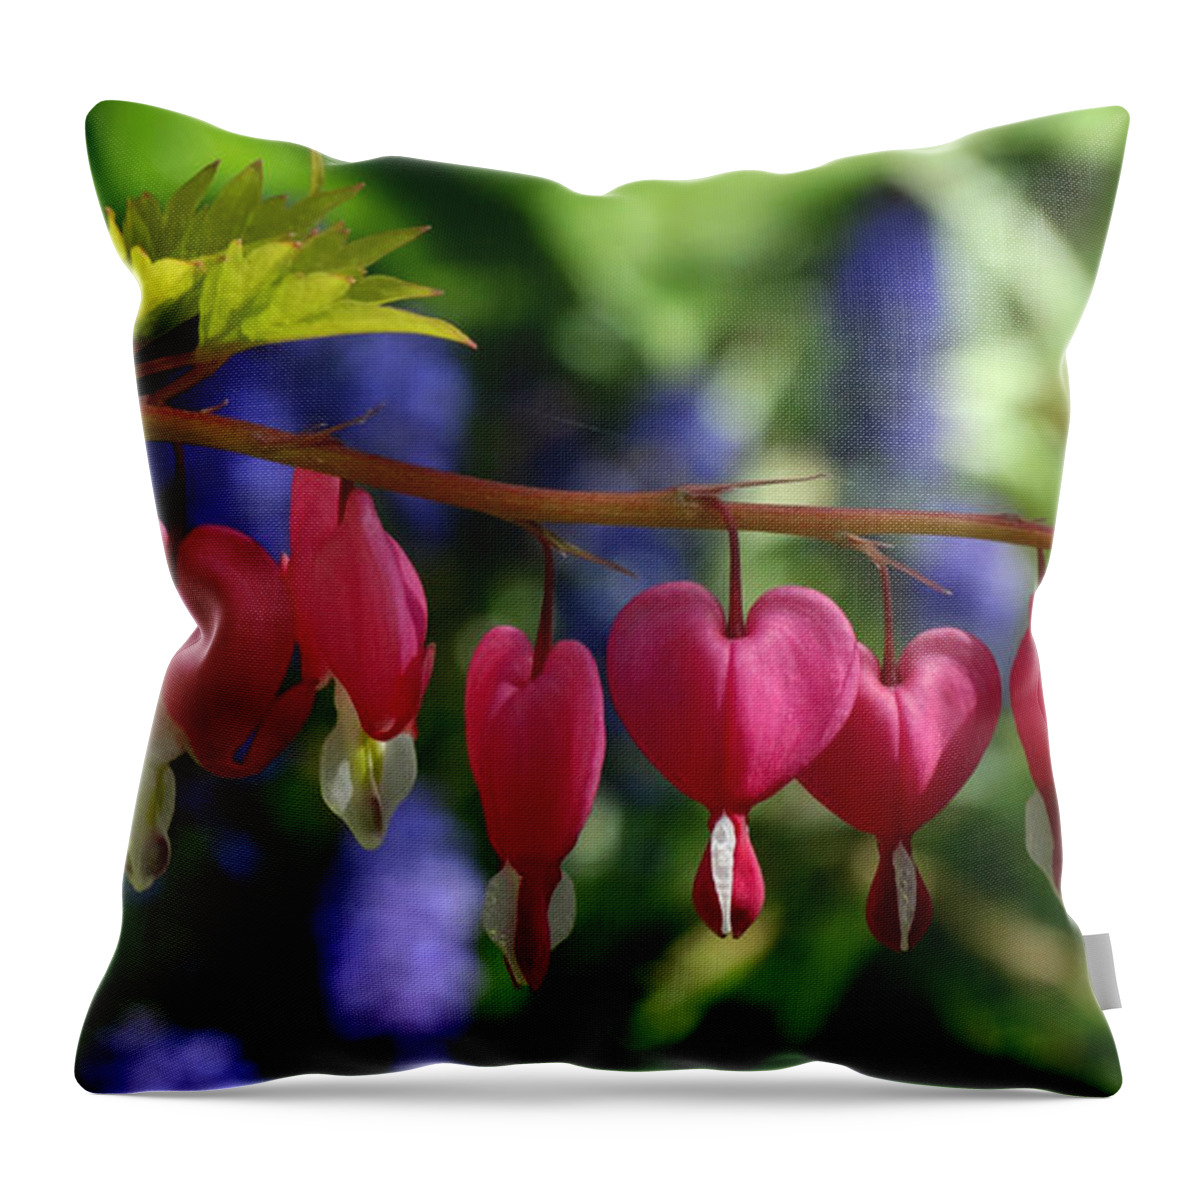 Flowers Throw Pillow featuring the photograph Bleeding Hearts by David T Wilkinson